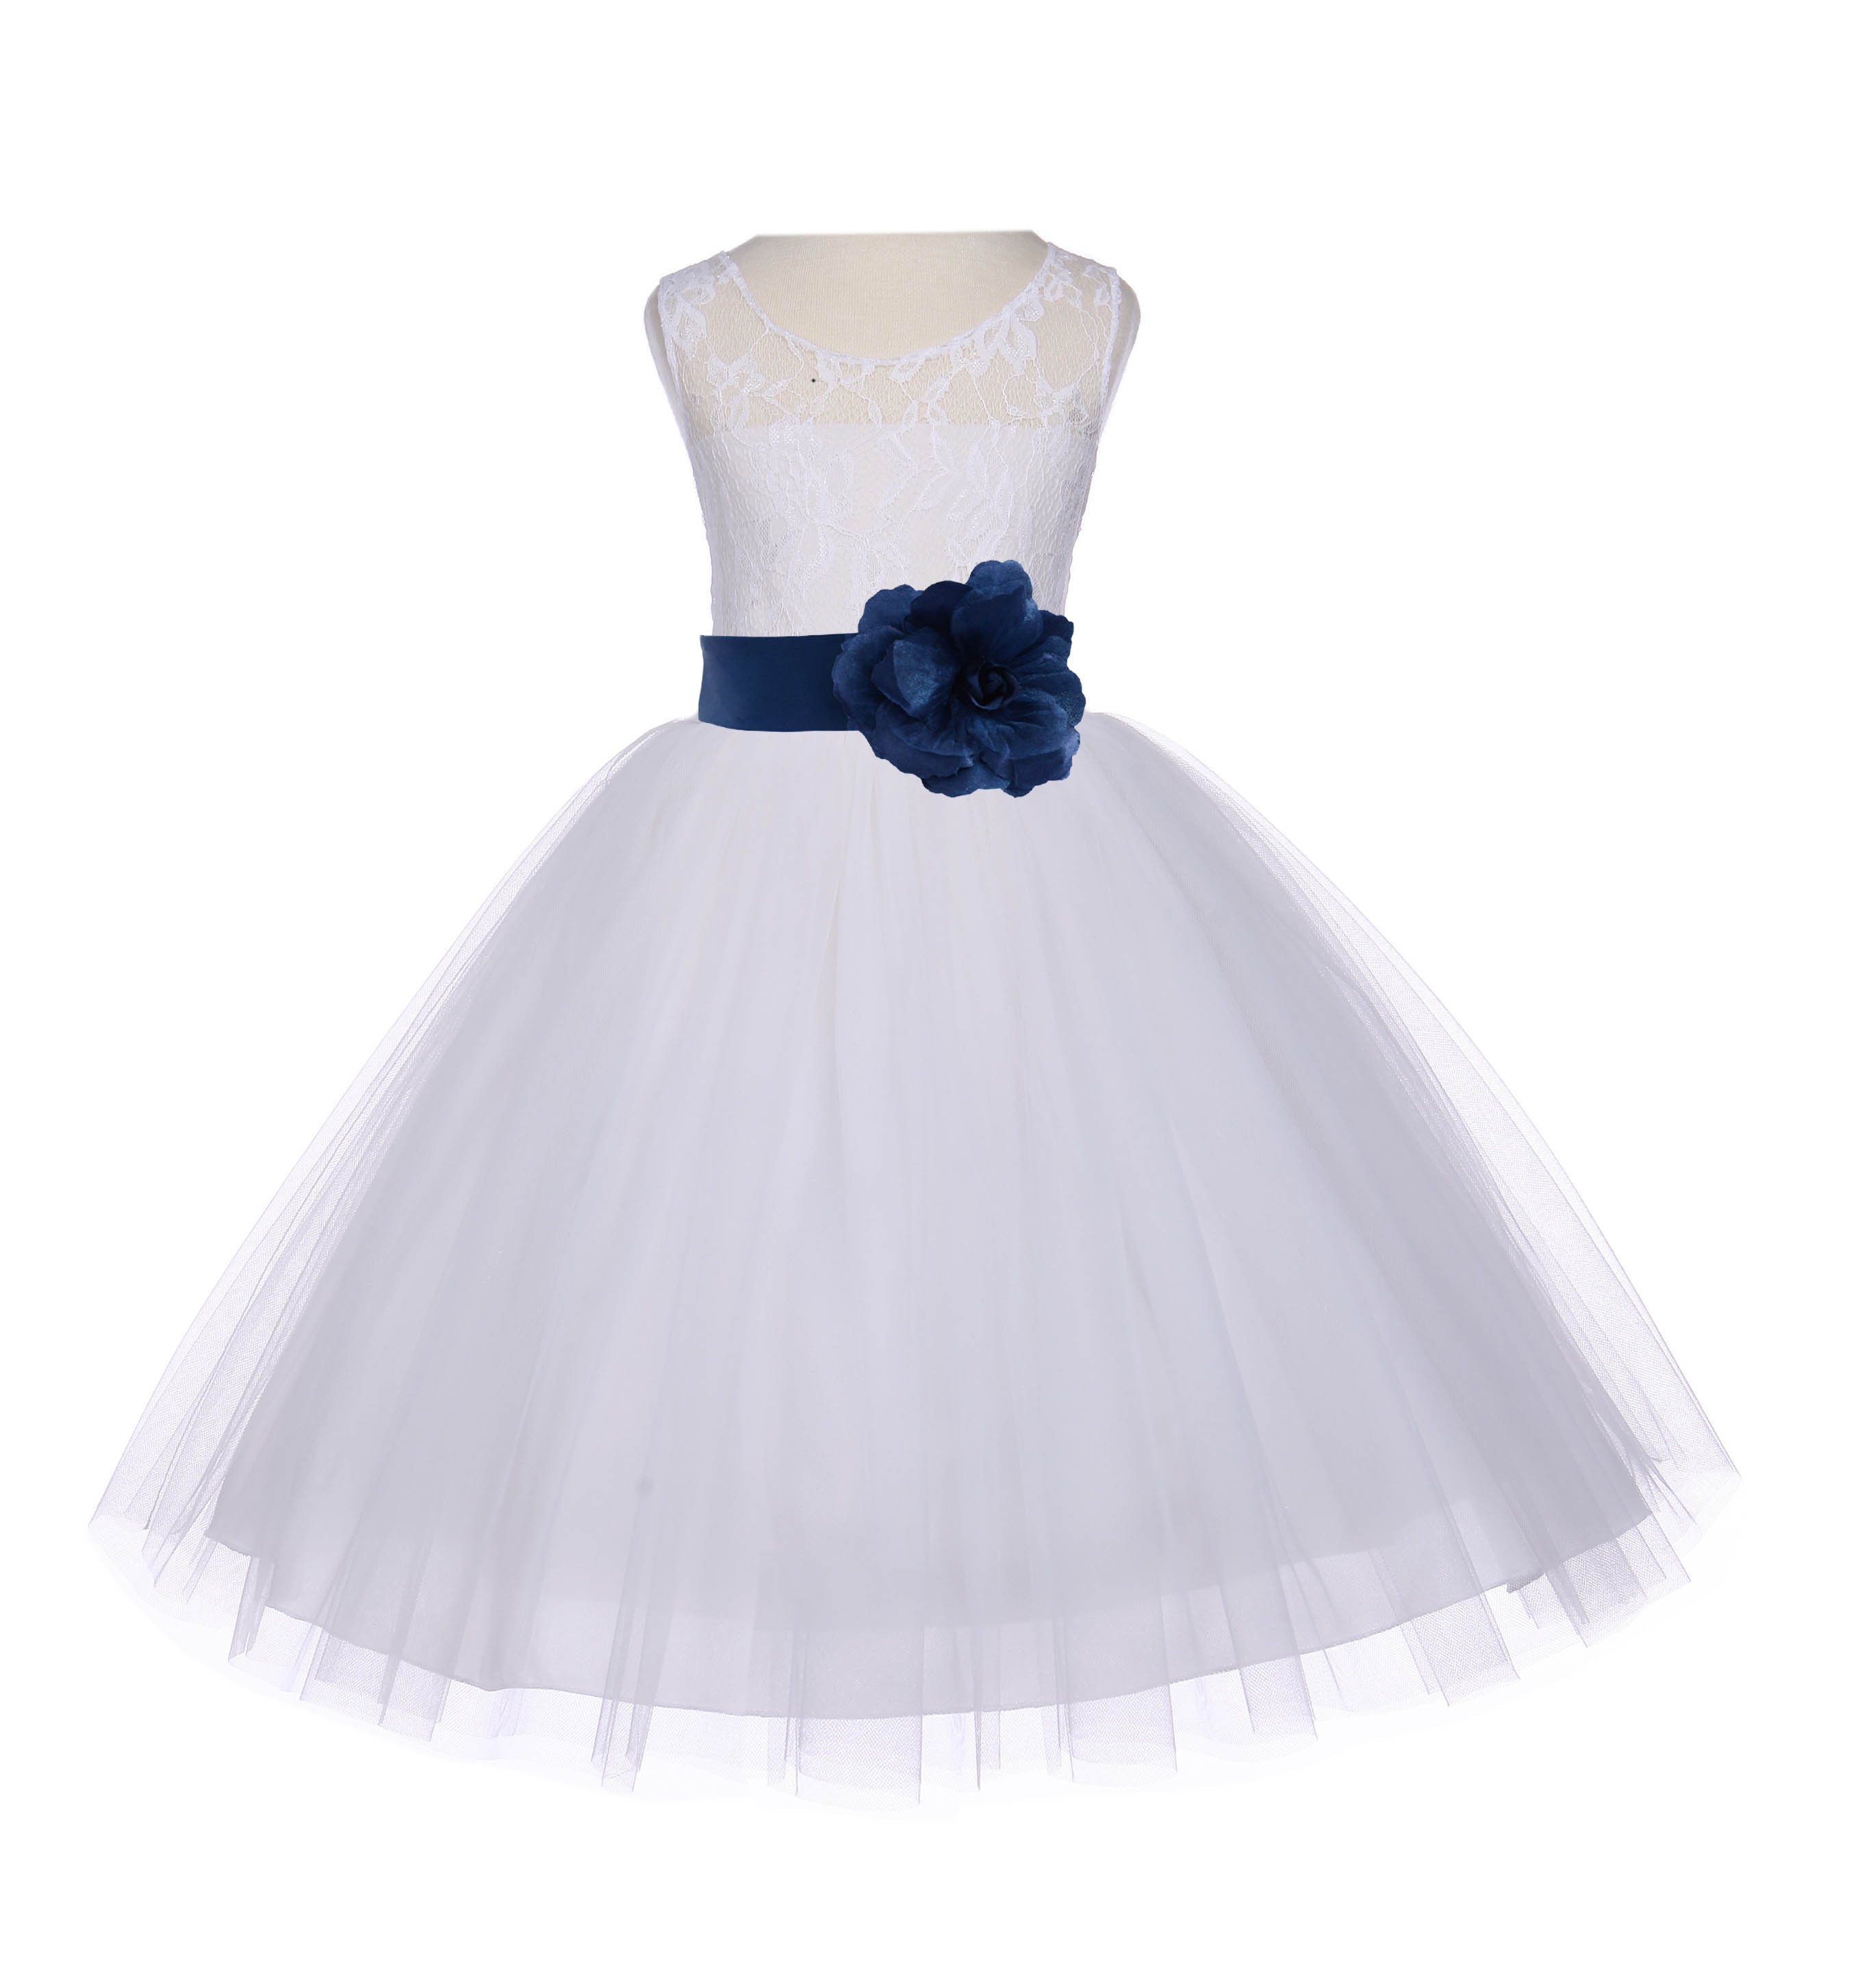 Ivory/Peacock Floral Lace Bodice Tulle Flower Girl Dress Bridesmaid 153S